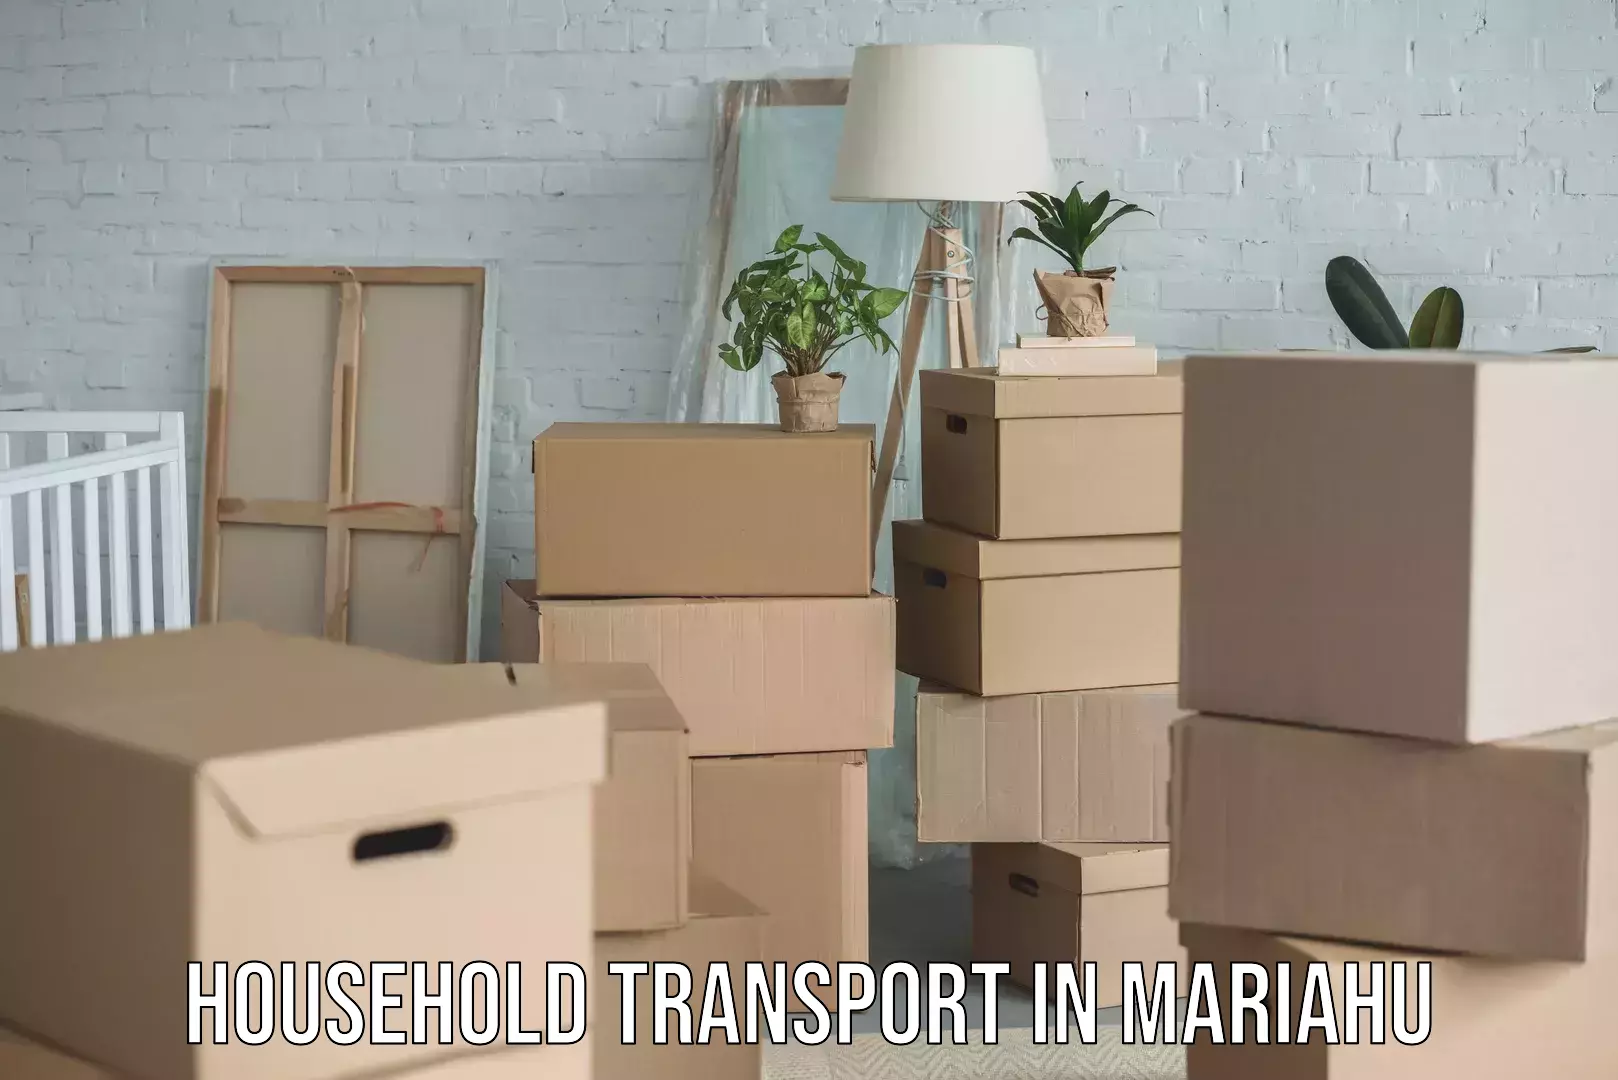 Home goods transport in Mariahu